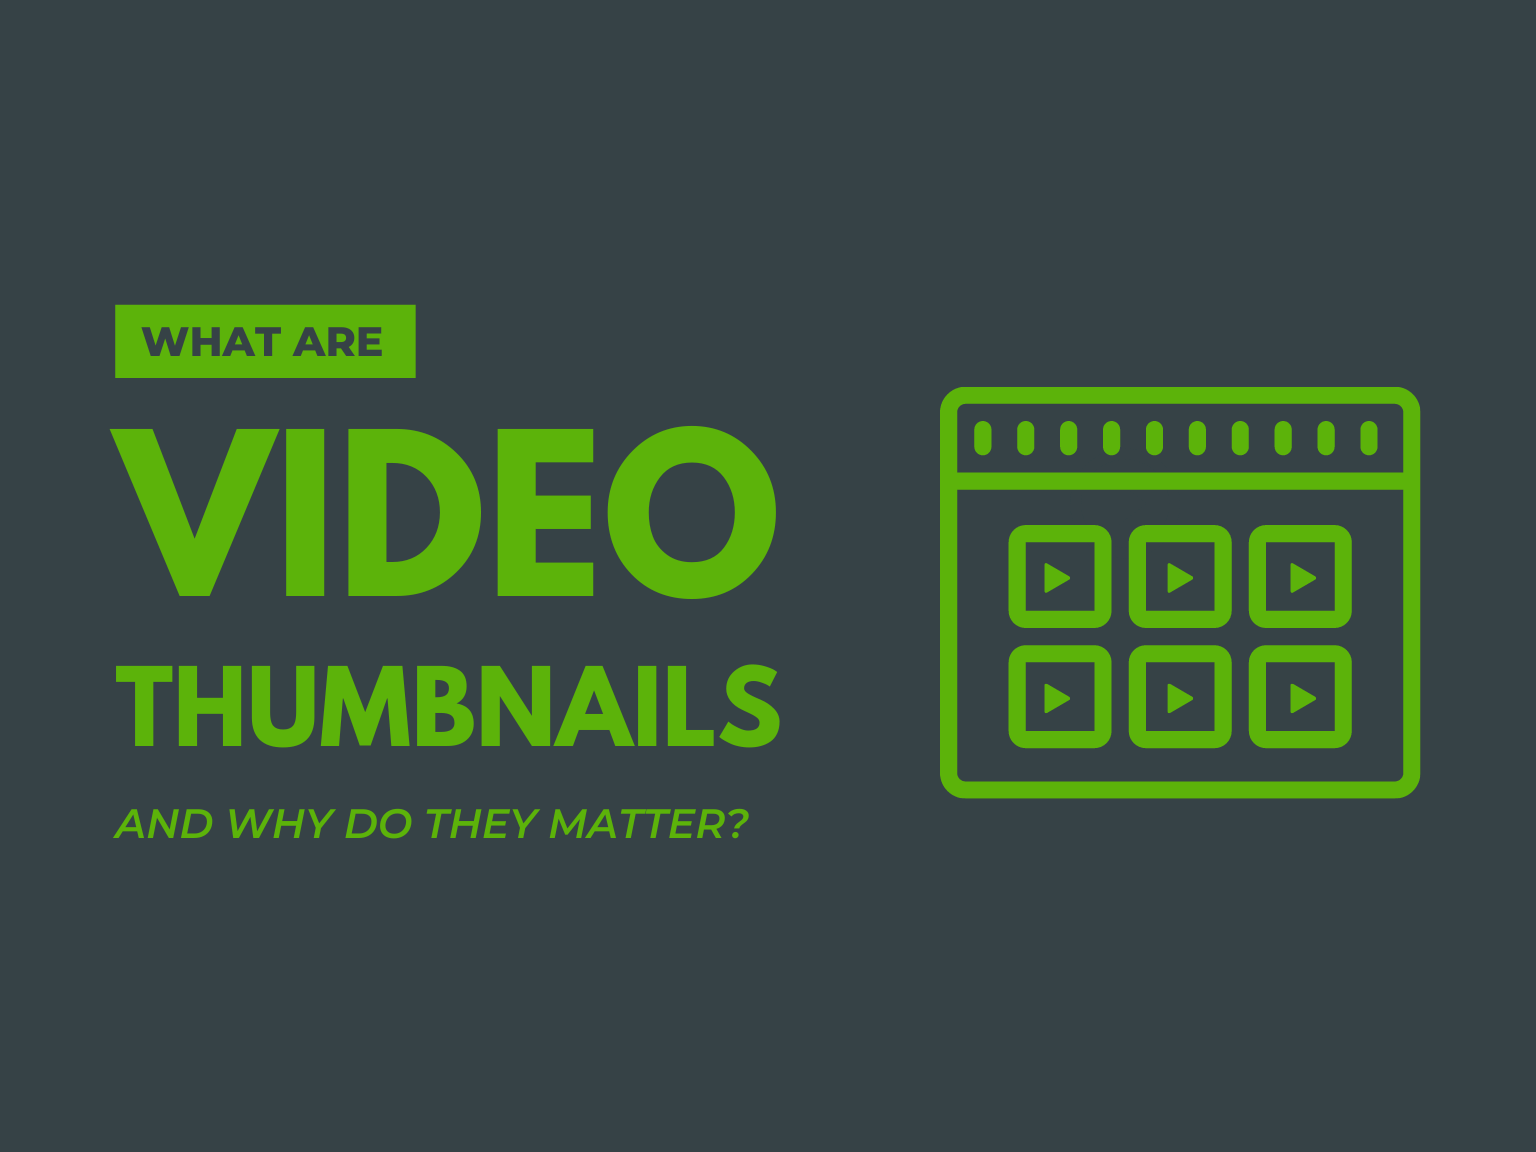 What Are Video Thumbnails and Why Do They Matter? | The TechSmith Blog